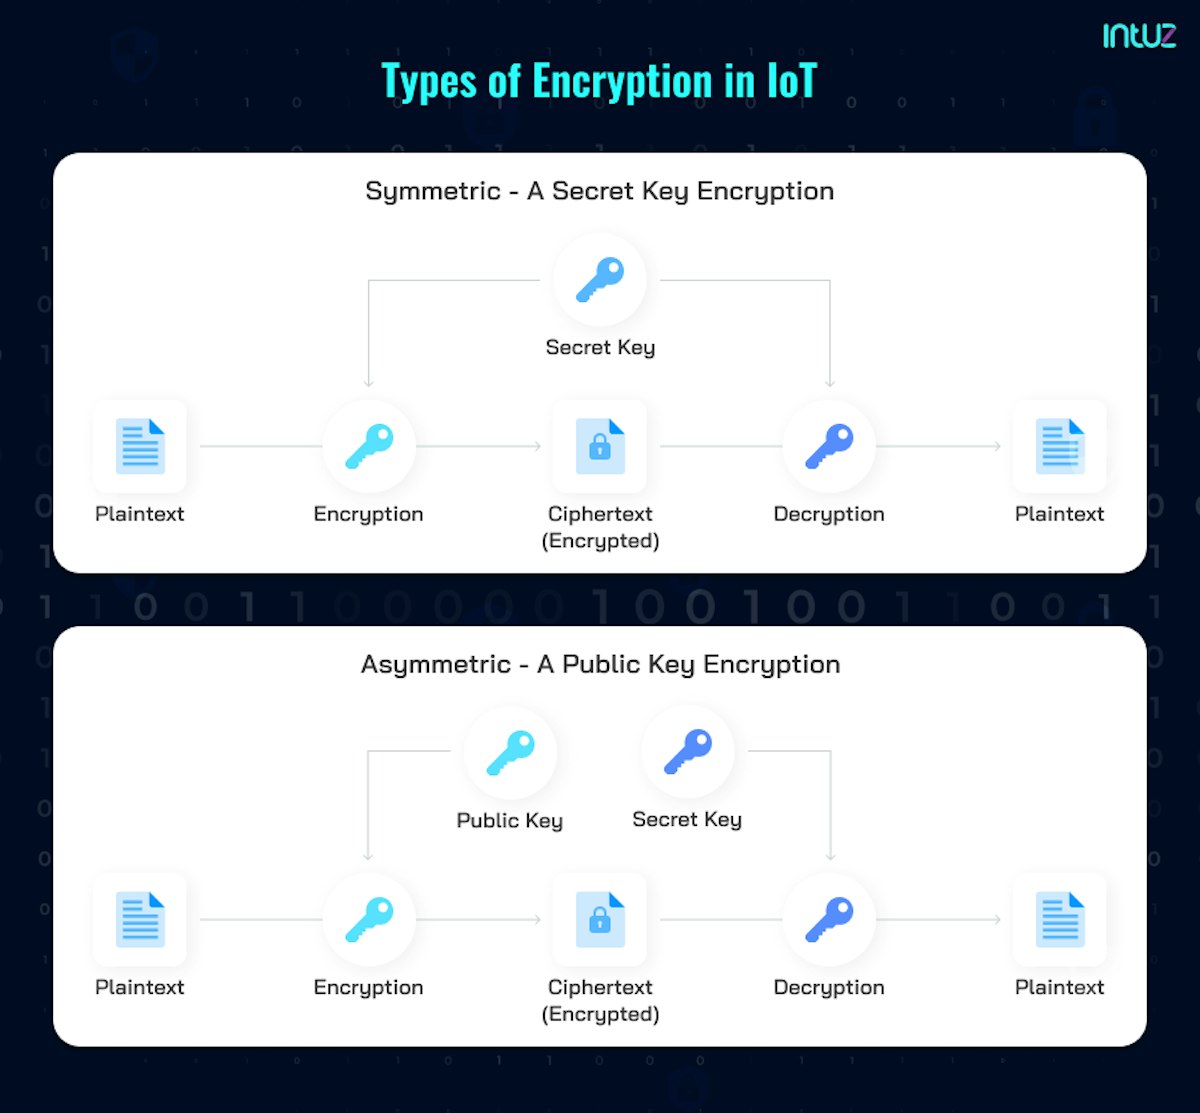 Types of encryption in IoT